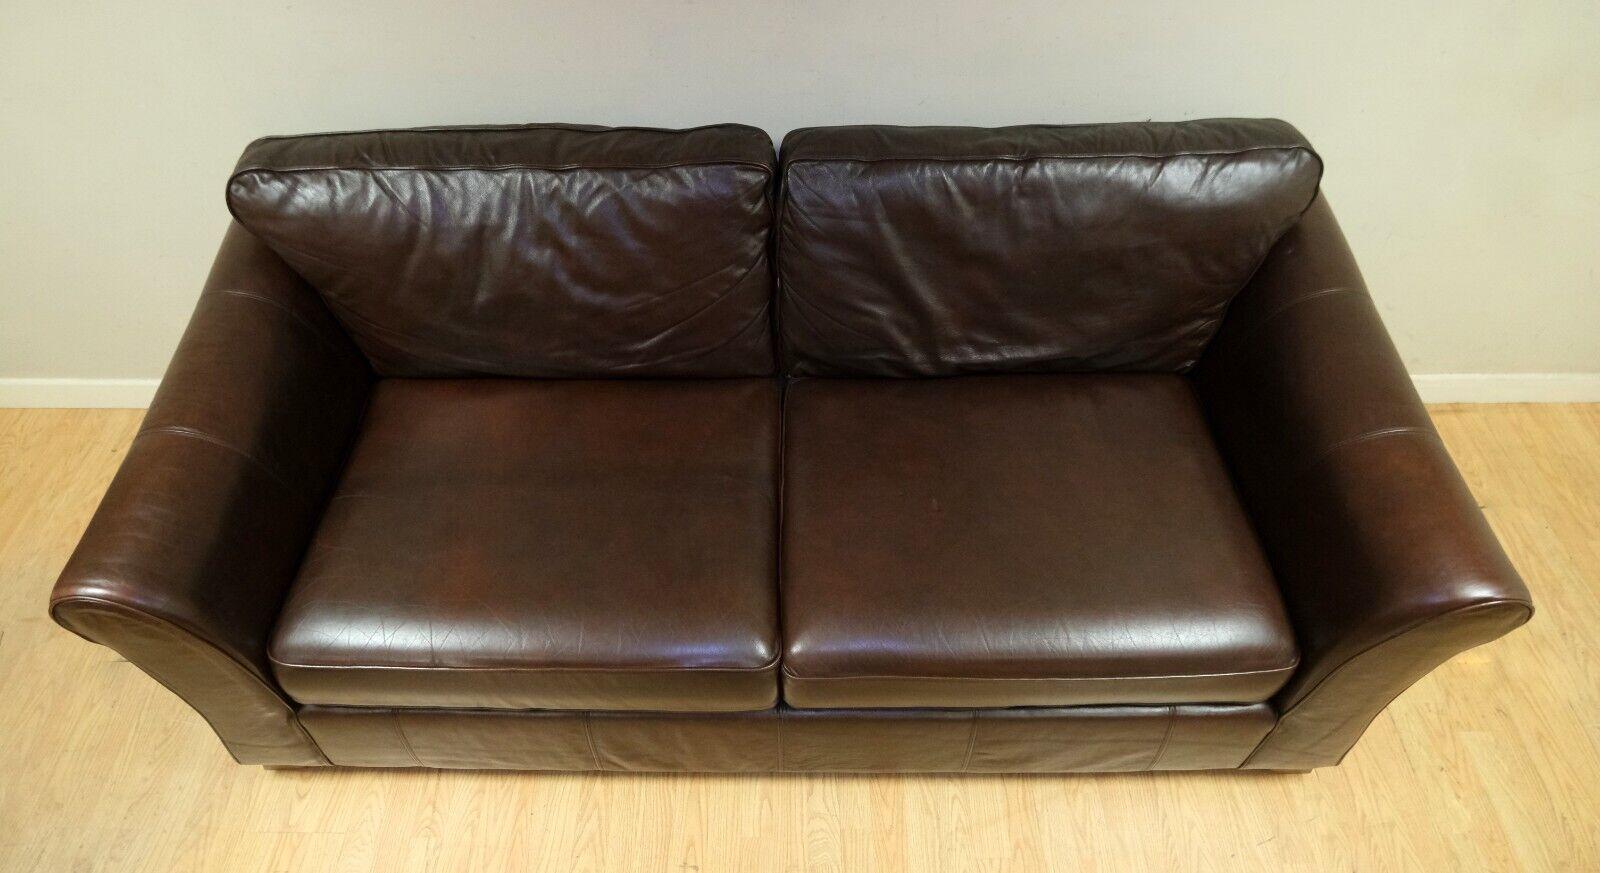 LOVELY MARKS & SPENCER ABBEY BRoWN LEATHER TWO SEATER SOFA ON WOODEN FEETs (Englisch) im Angebot